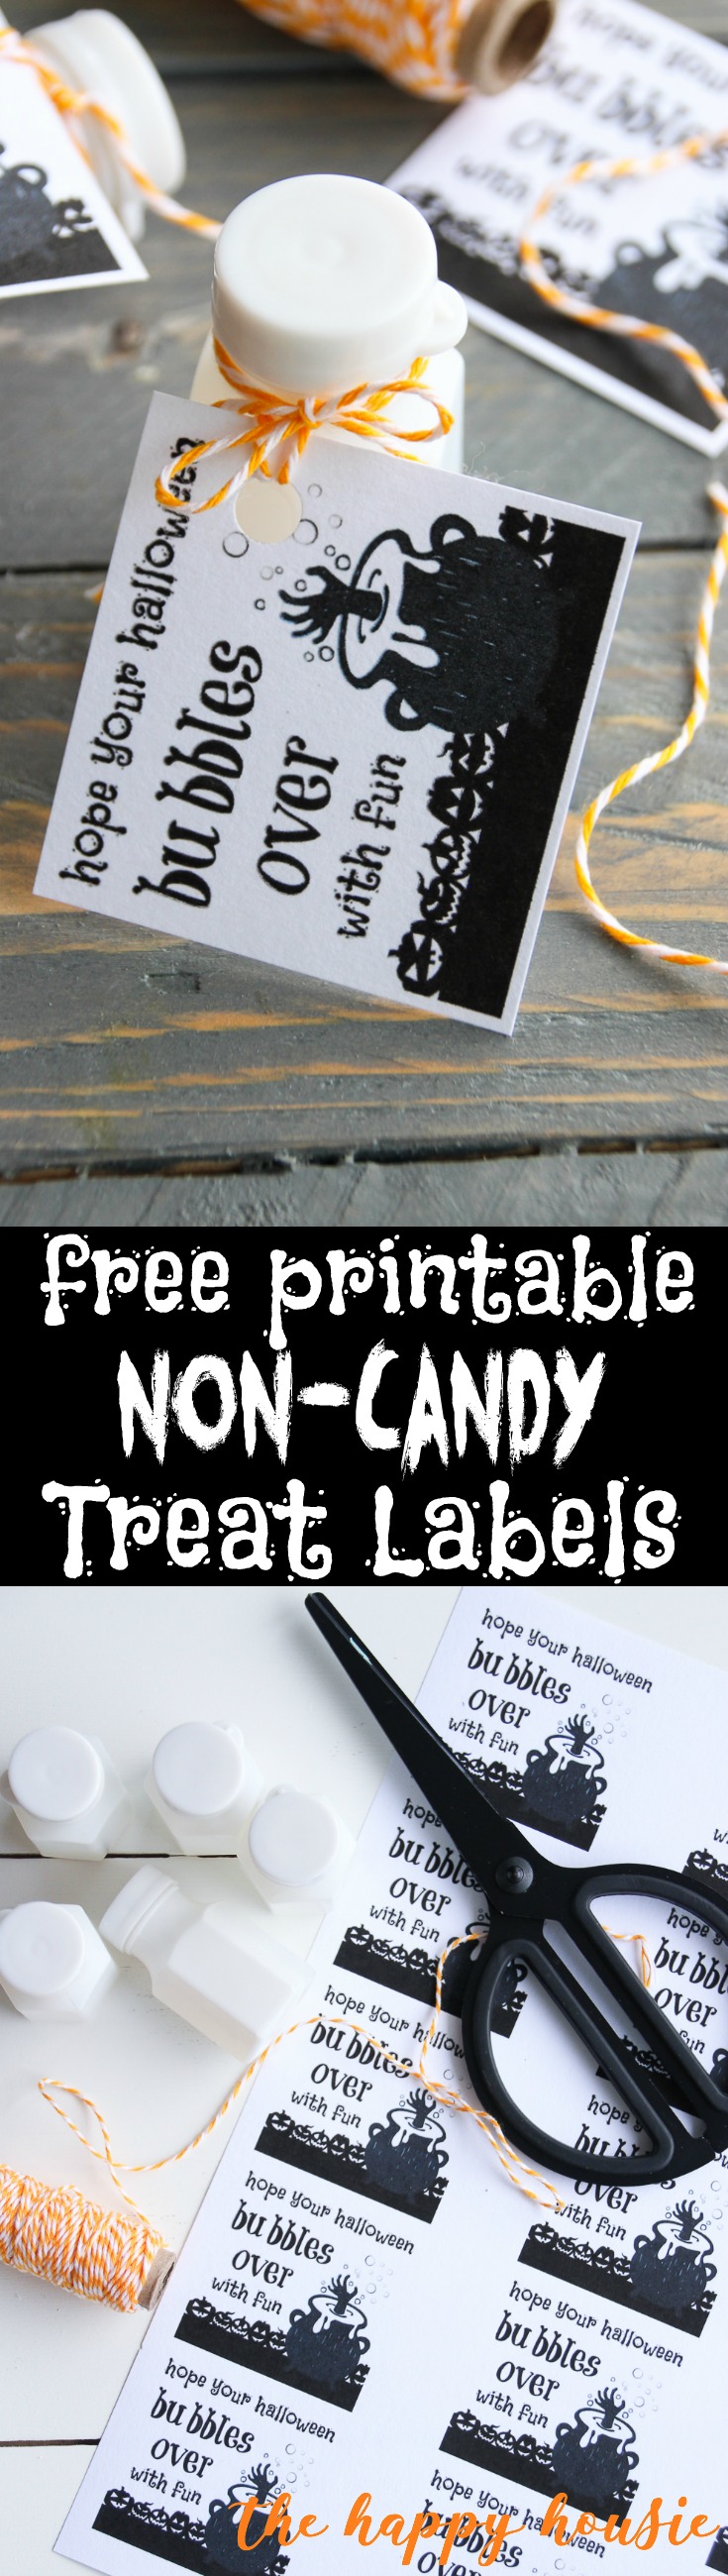 Free Printable Non-Candy Treat Labels graphic.